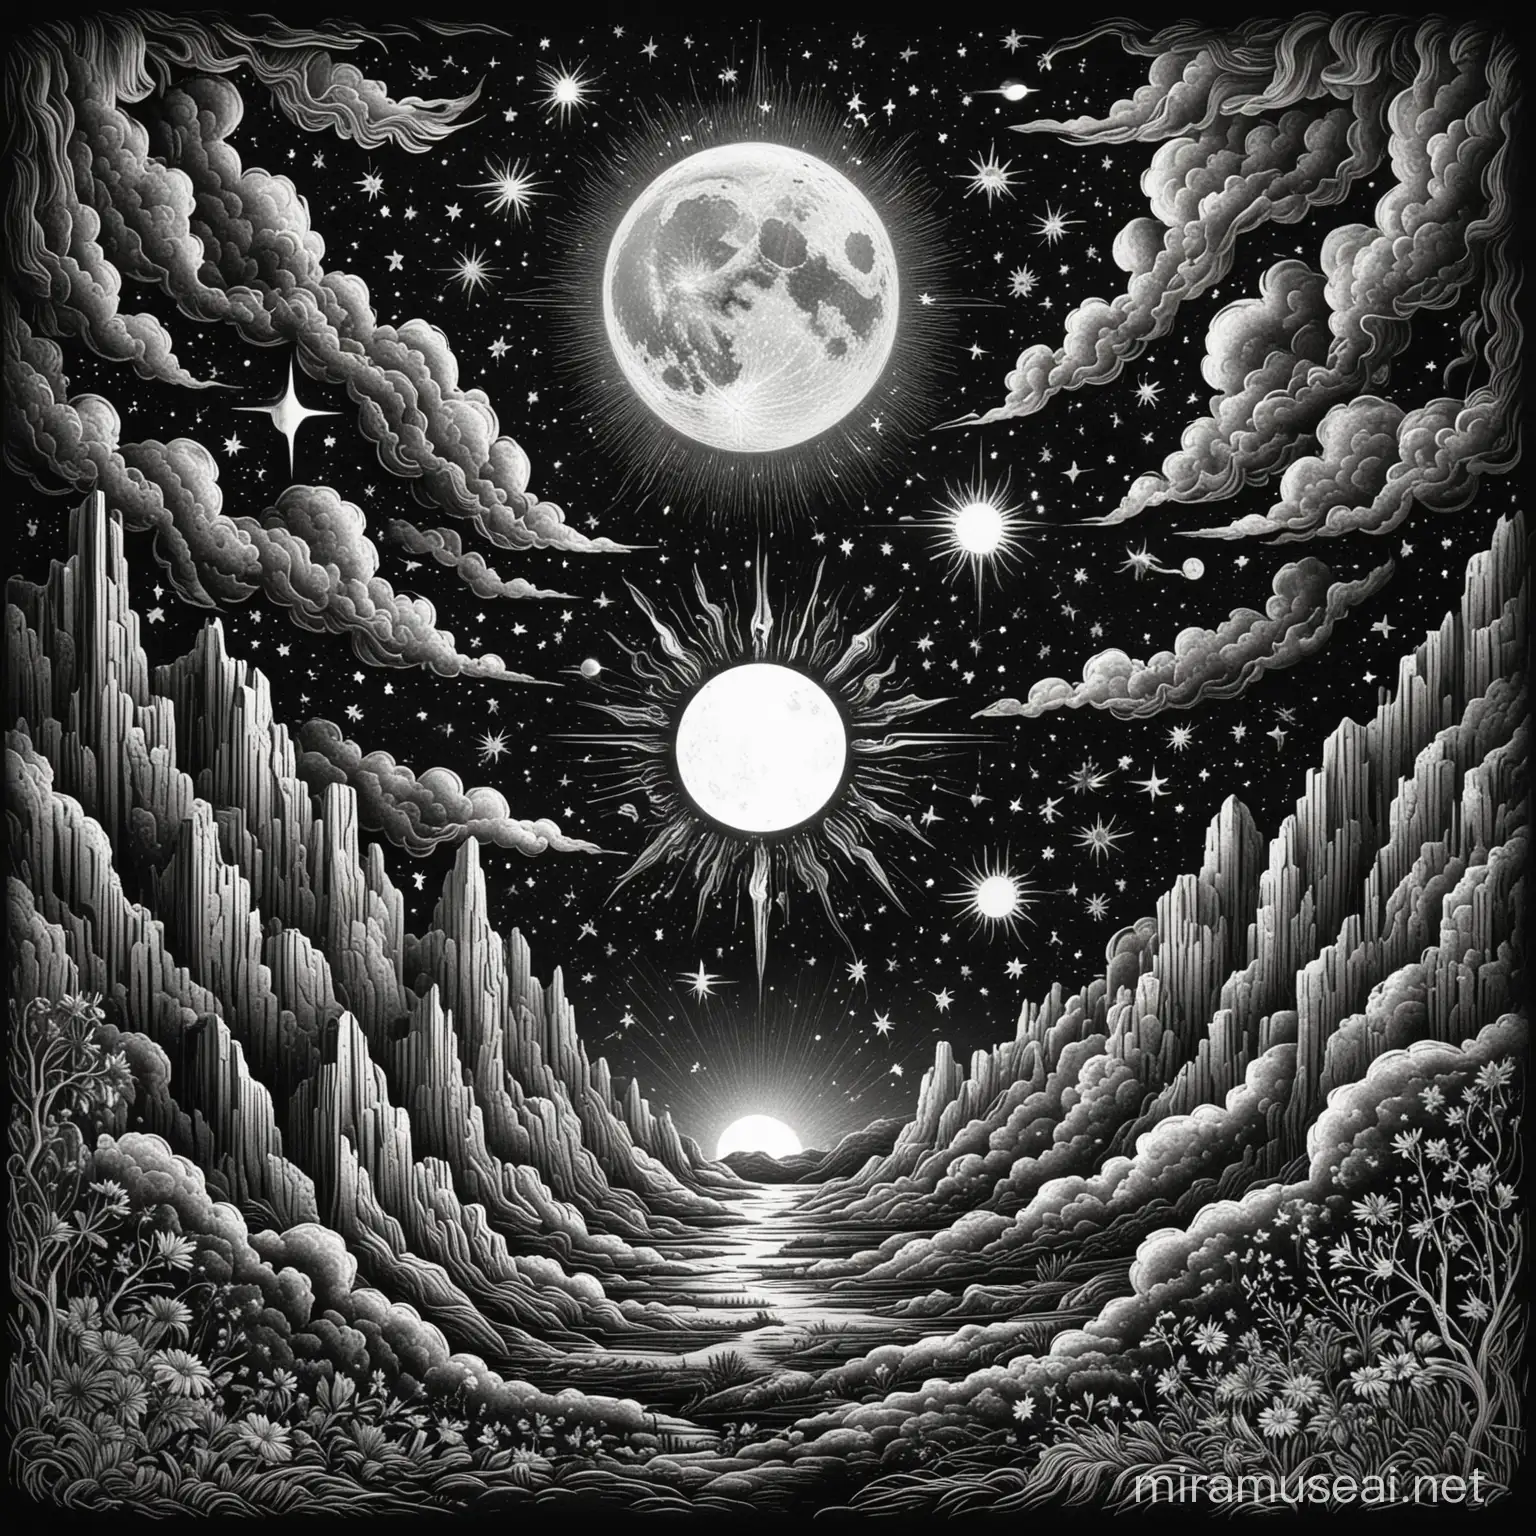 day and night scene engraved style, with moon, stars and sun. Black and white